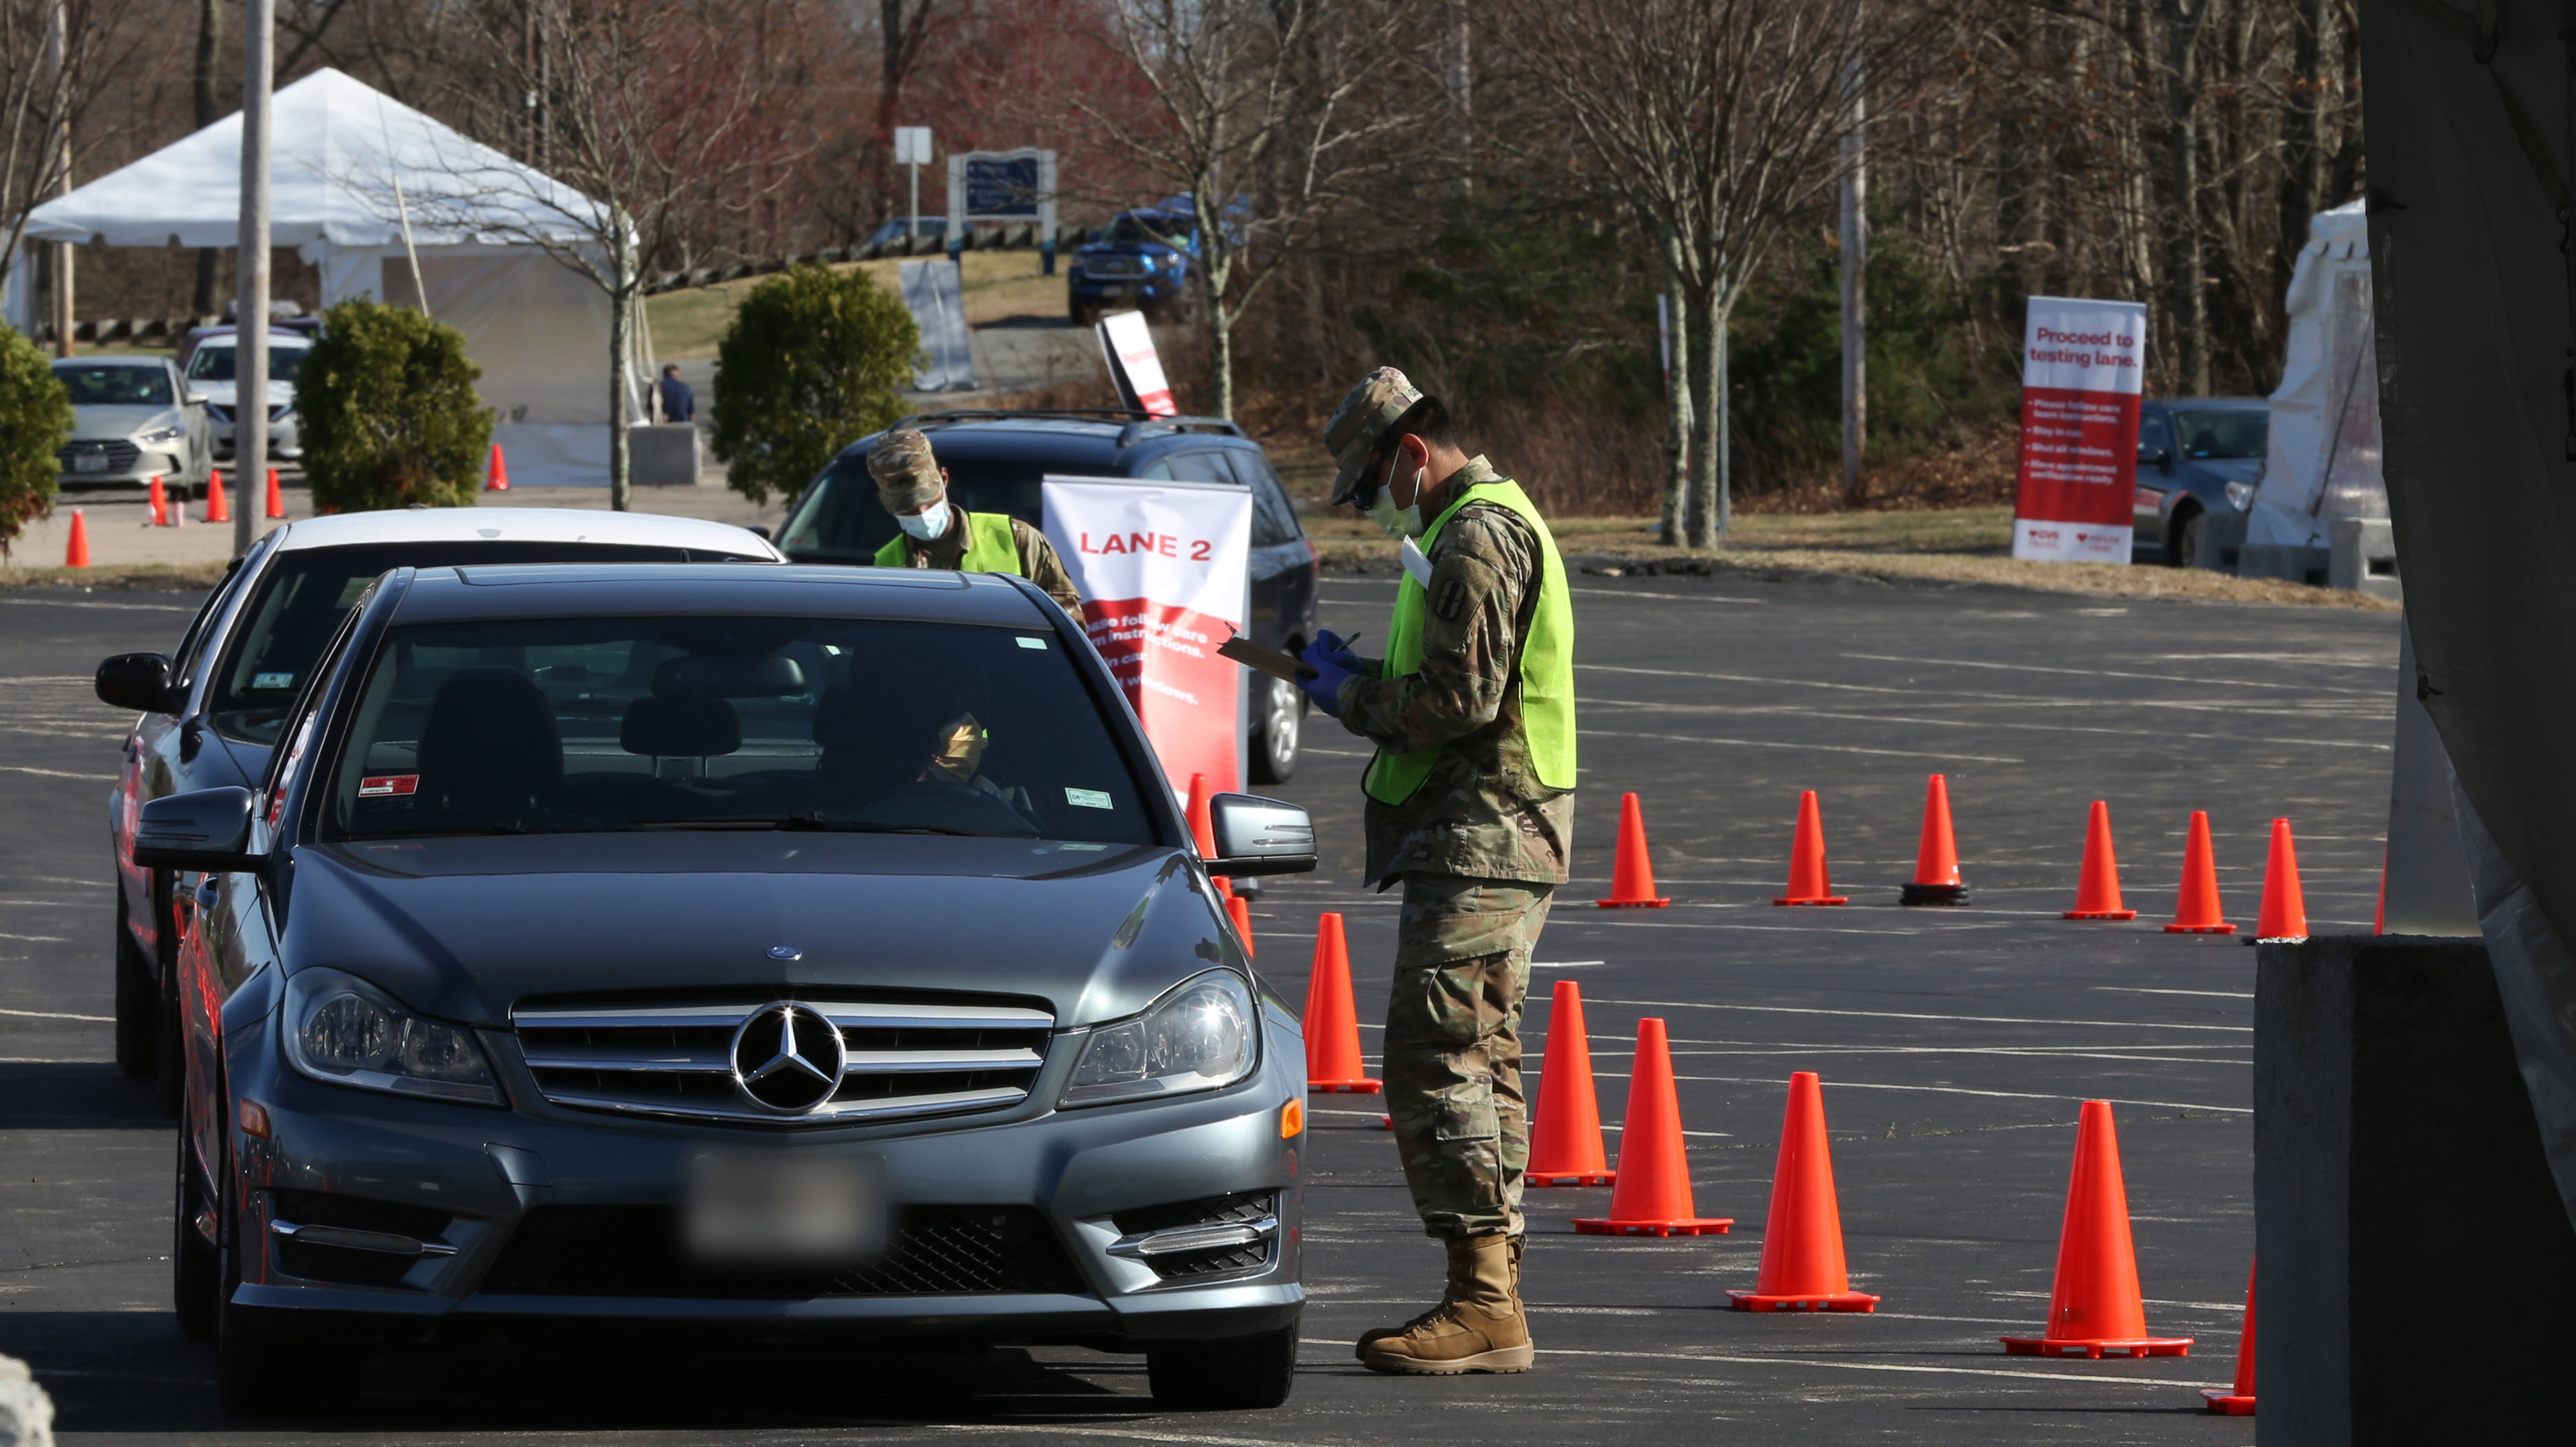 An Army National Guard member wearing fatigues, a traffic vest and a medical-grade mask, directs a patient through the rapid COVID-19 testing site in Lincoln, Rhode Island.